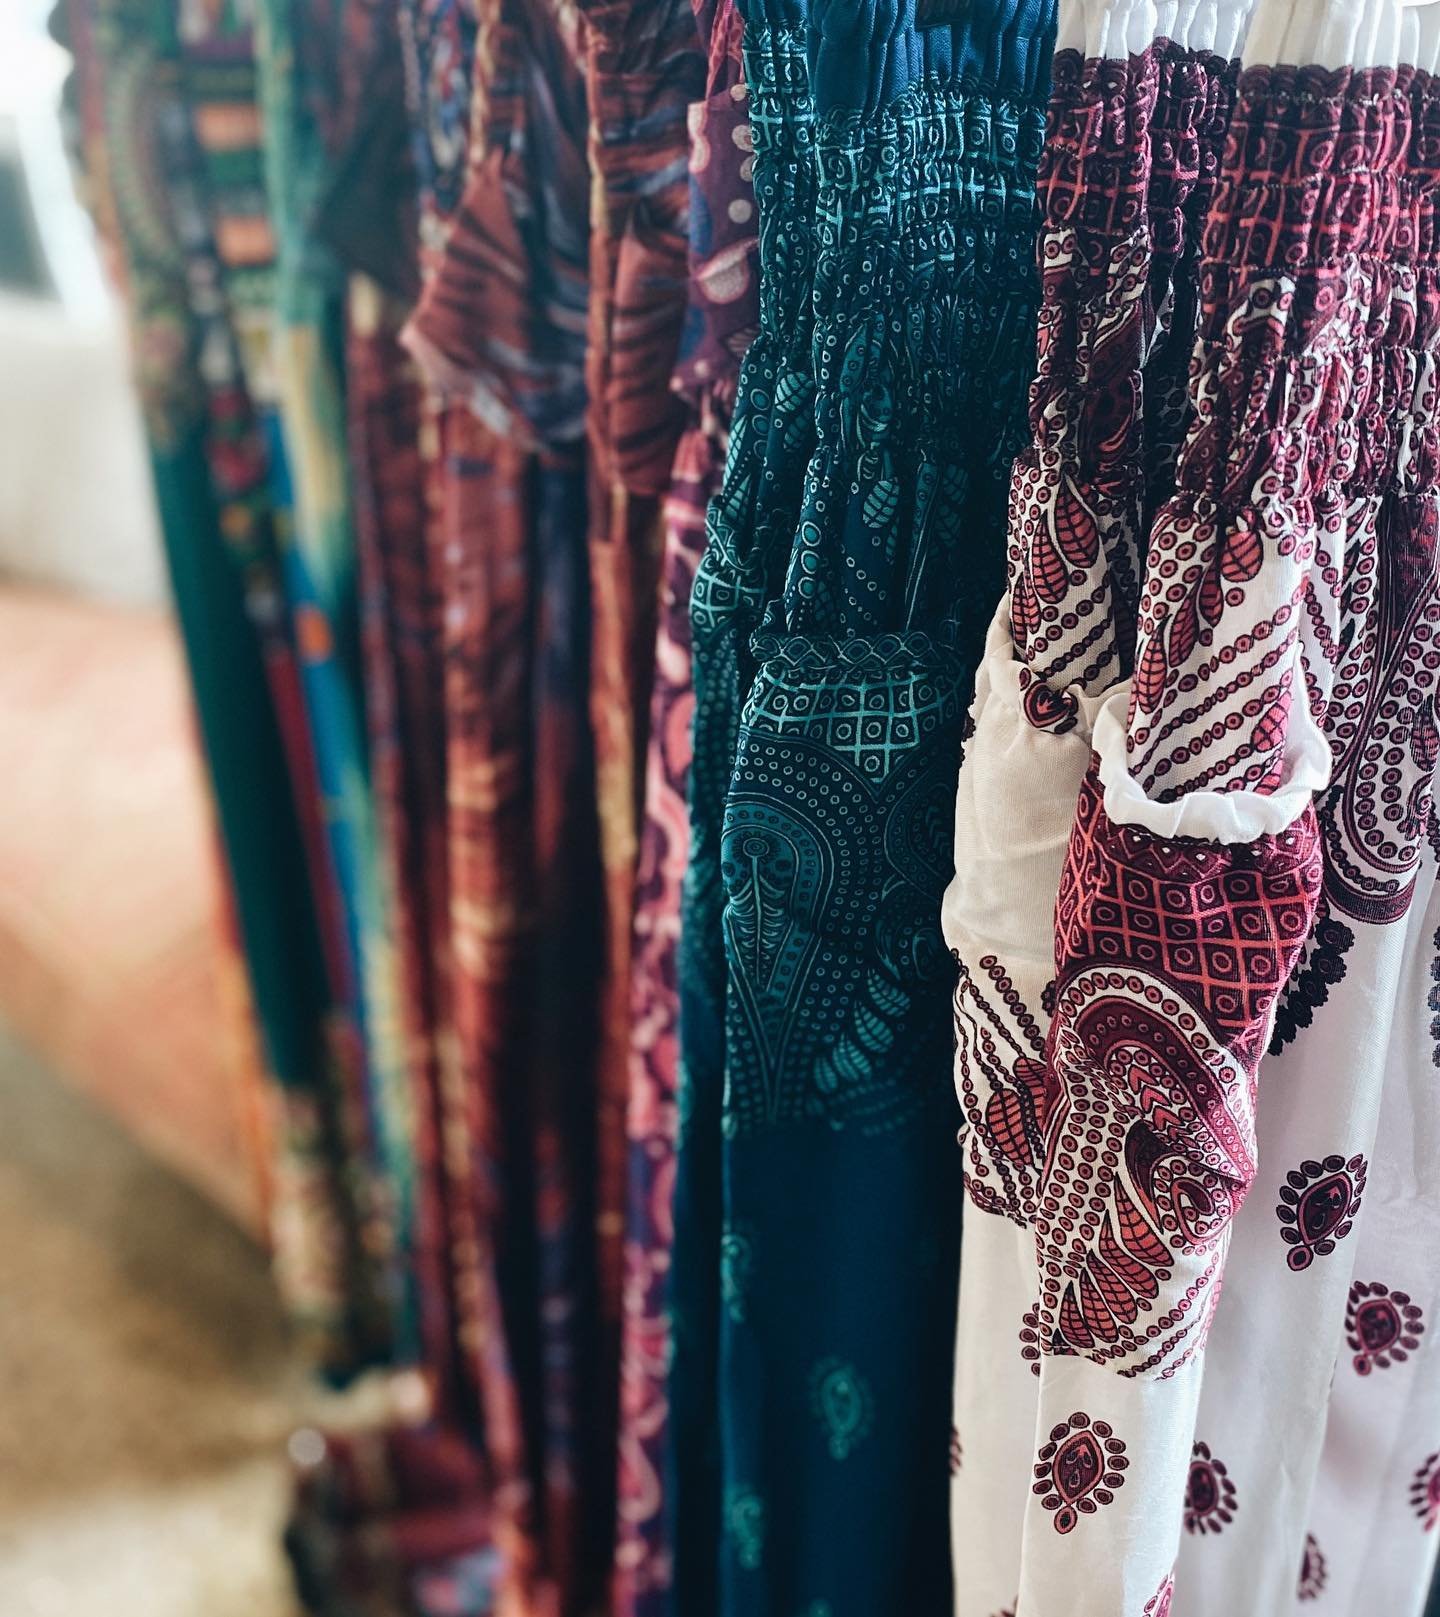 It&rsquo;s time!

Harem skirt + pant season.
We have lots of colors/patterns to choose from.
&bull;
&bull;
&bull;
&bull;
#harempants #harem #comfyclothes #springvibes #summervibes #looseclothing #styleinspiration #inharmonyoga #pants #skirt #yogabout